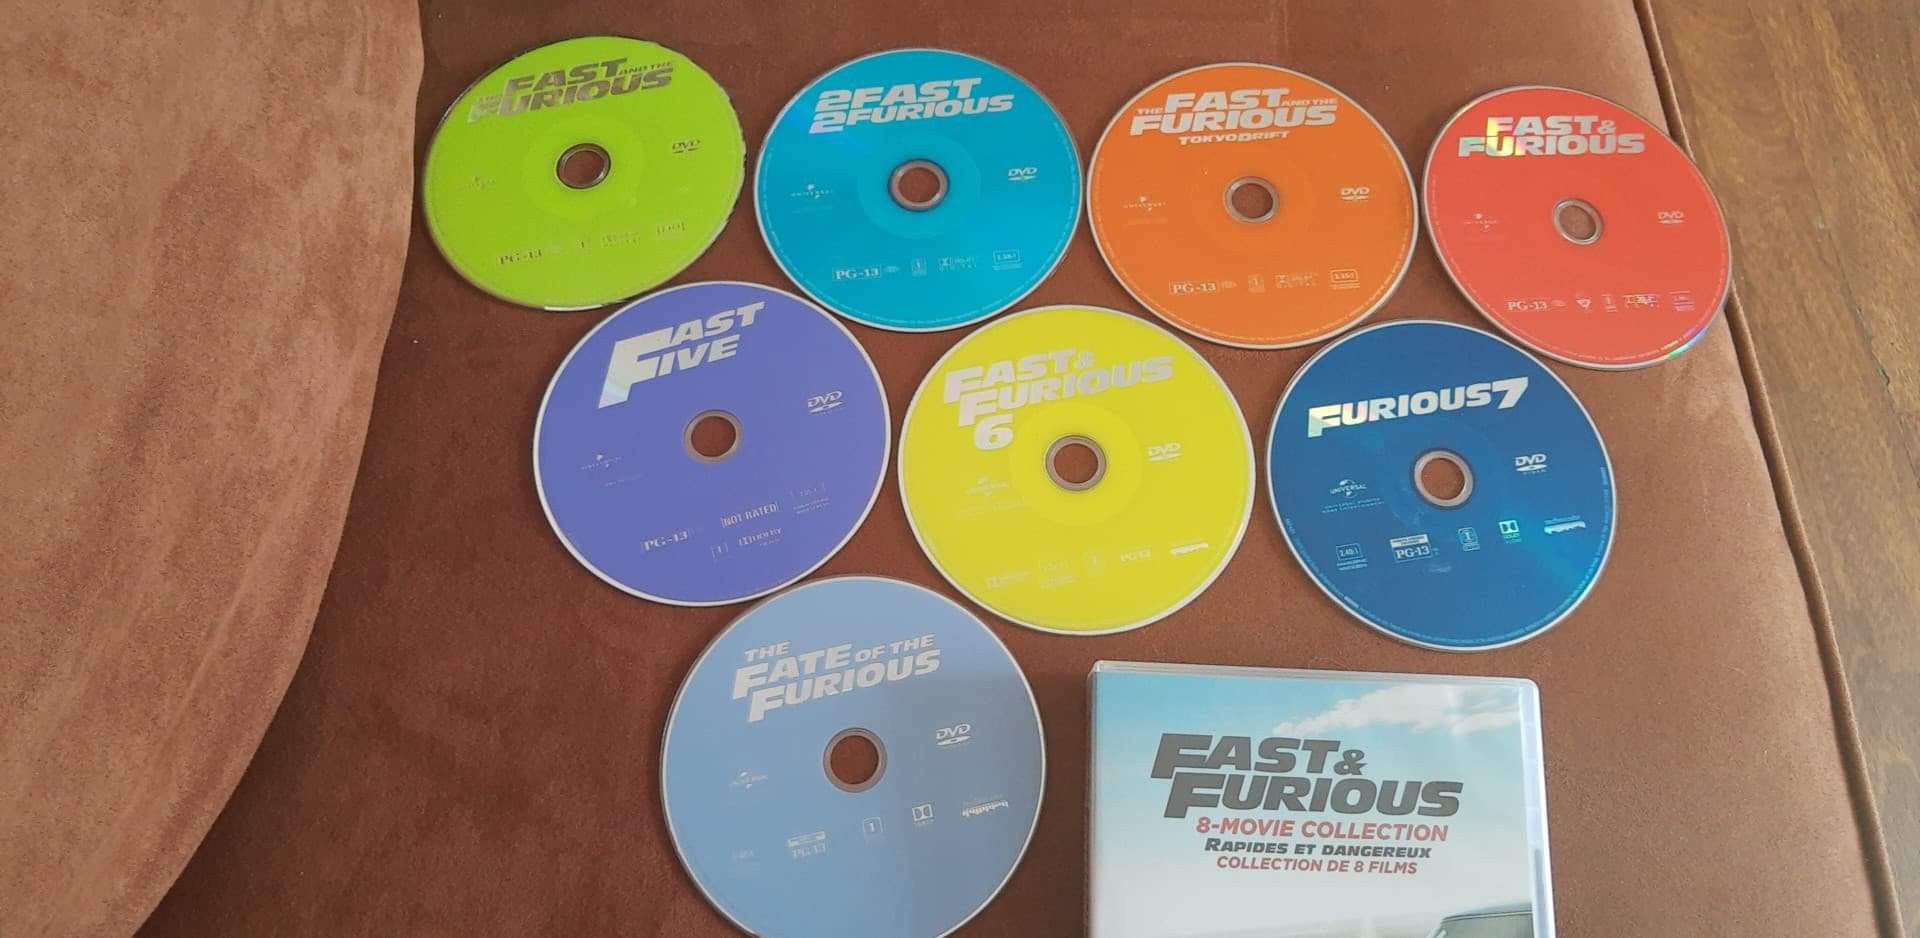 Fast and the furious 8 DVD box set collection